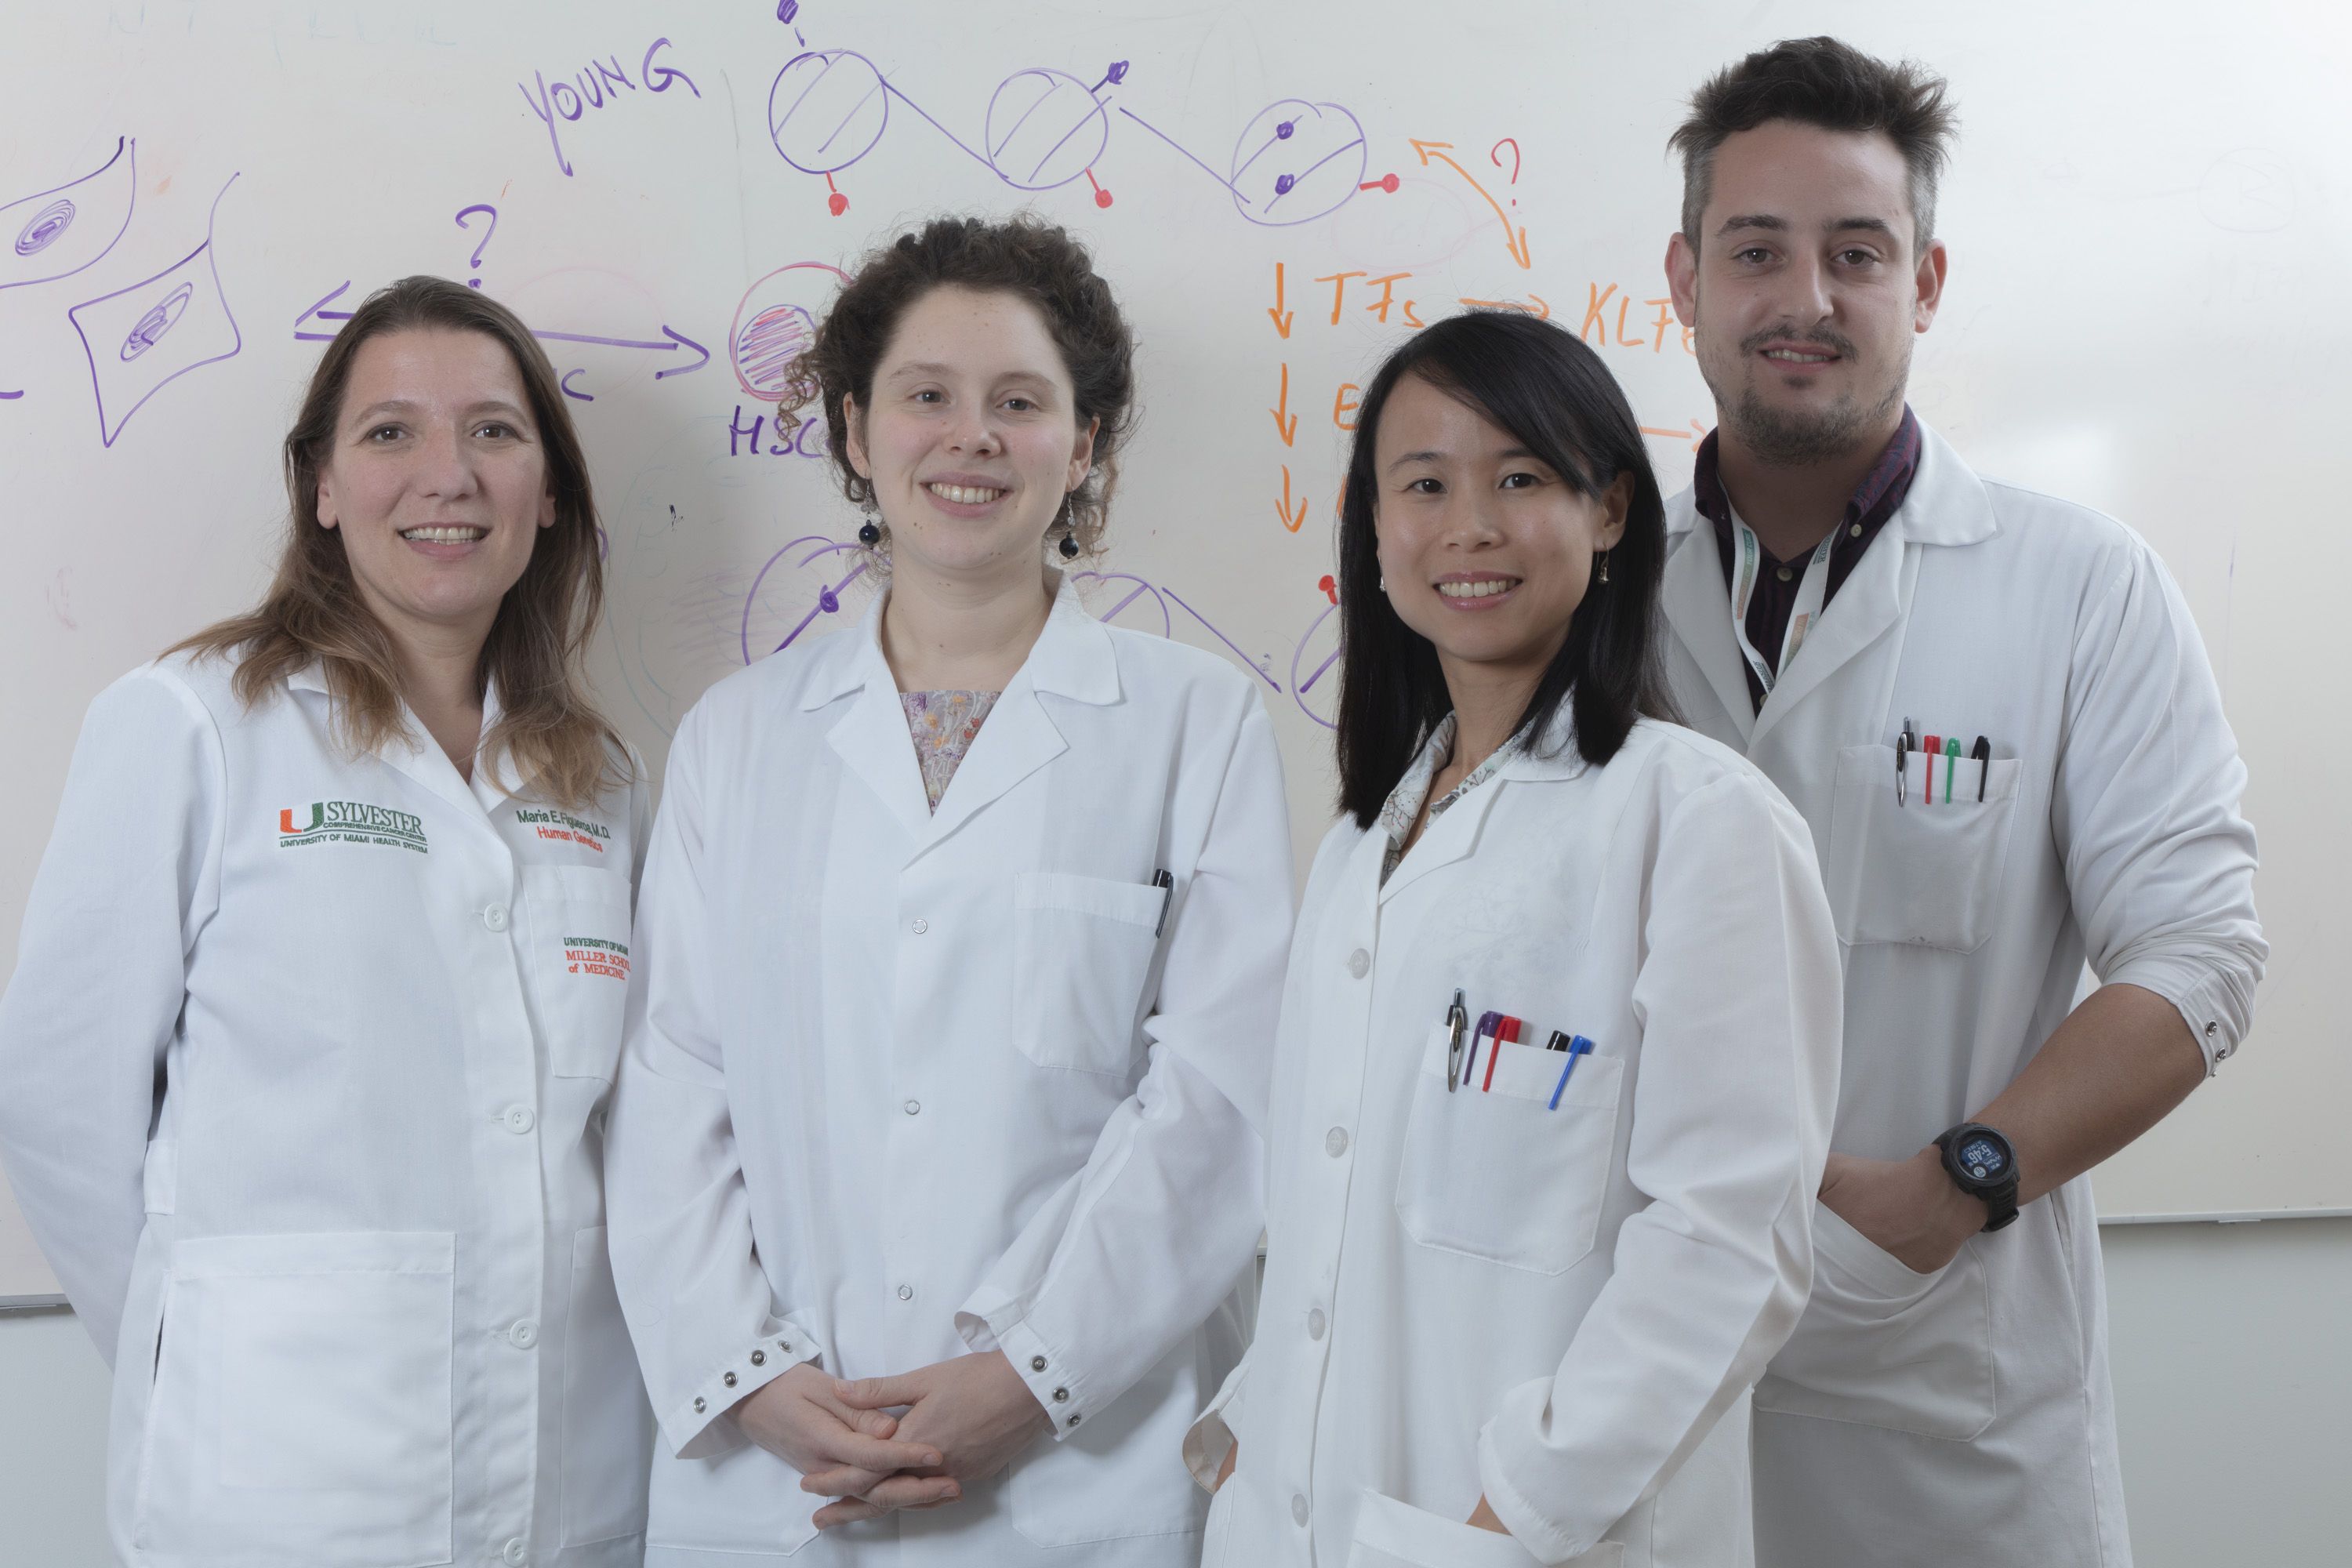 From left to right: Maria Figueroa, Emmalee Adelman, and second authors Emily (Hsuan-Ting) Huang and Alejandro Roisman.